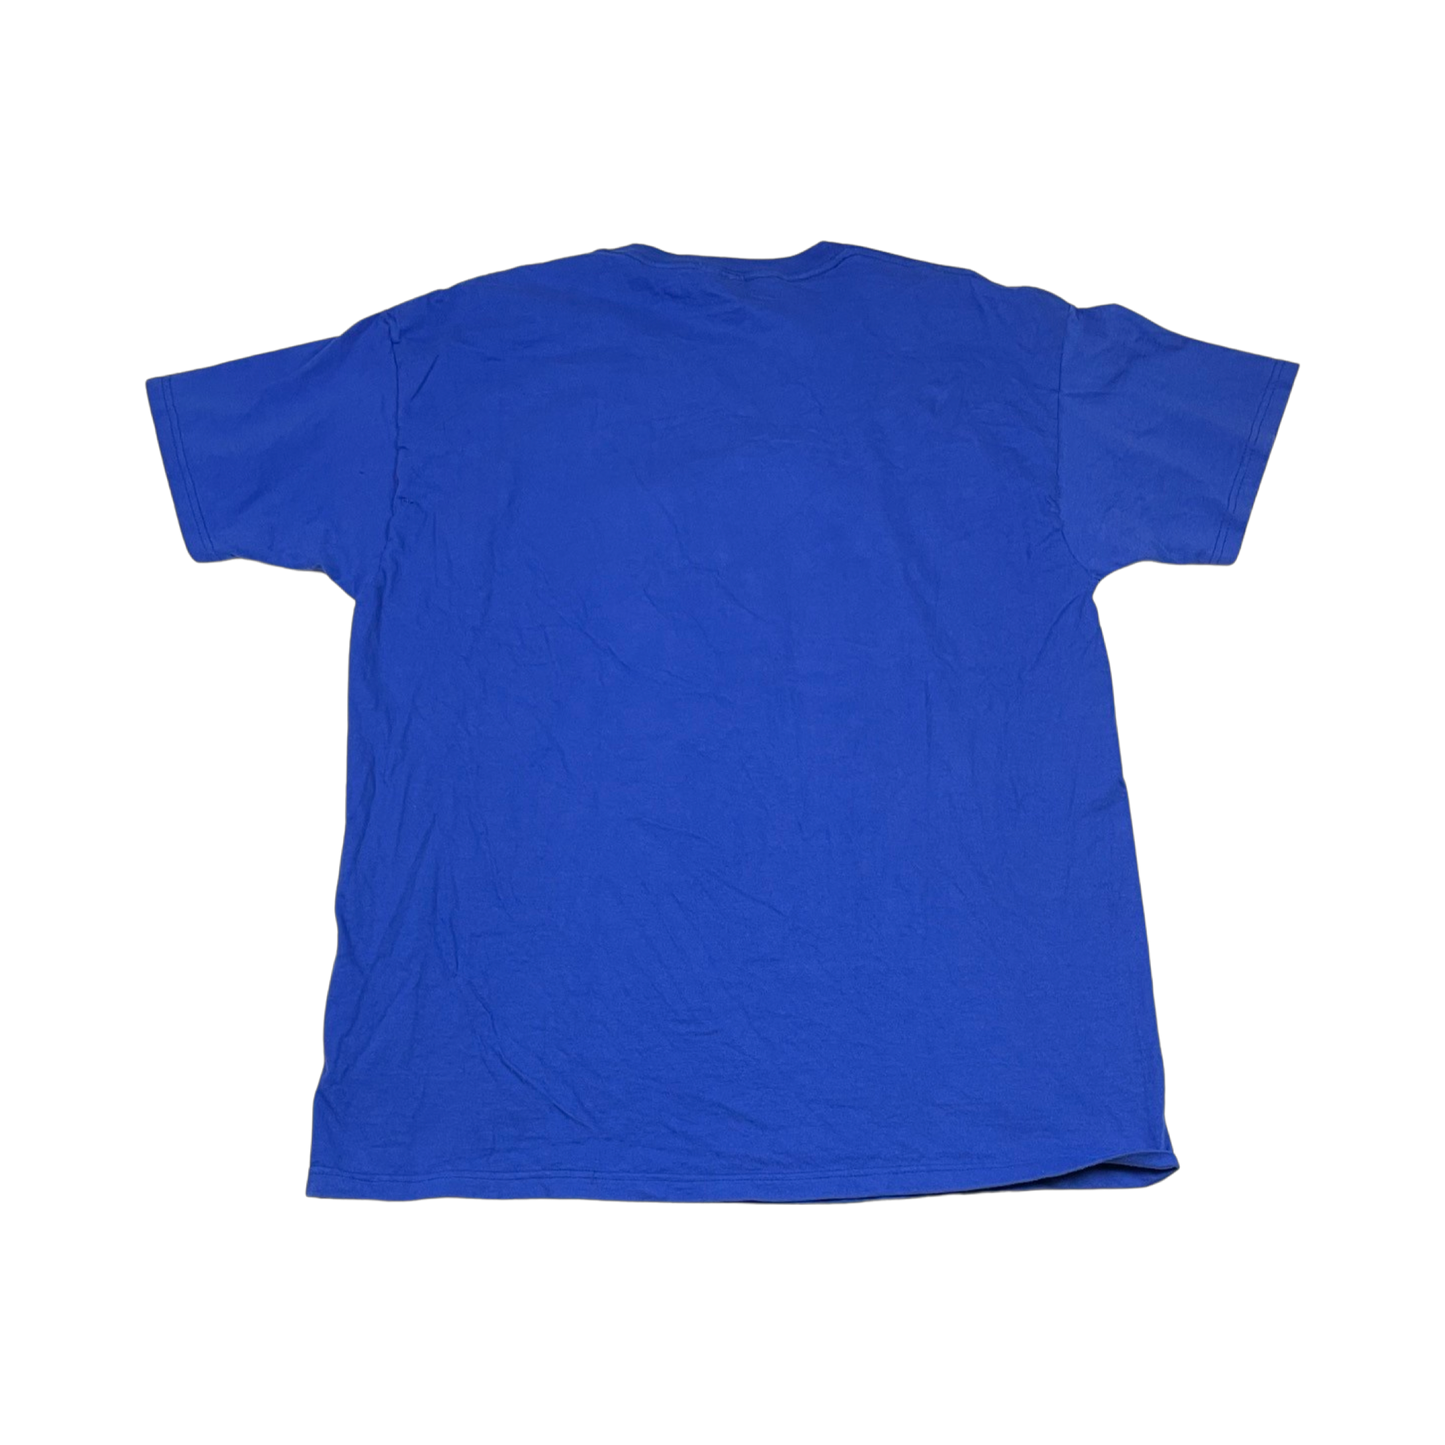 '00s Indianapolis Colts Tee